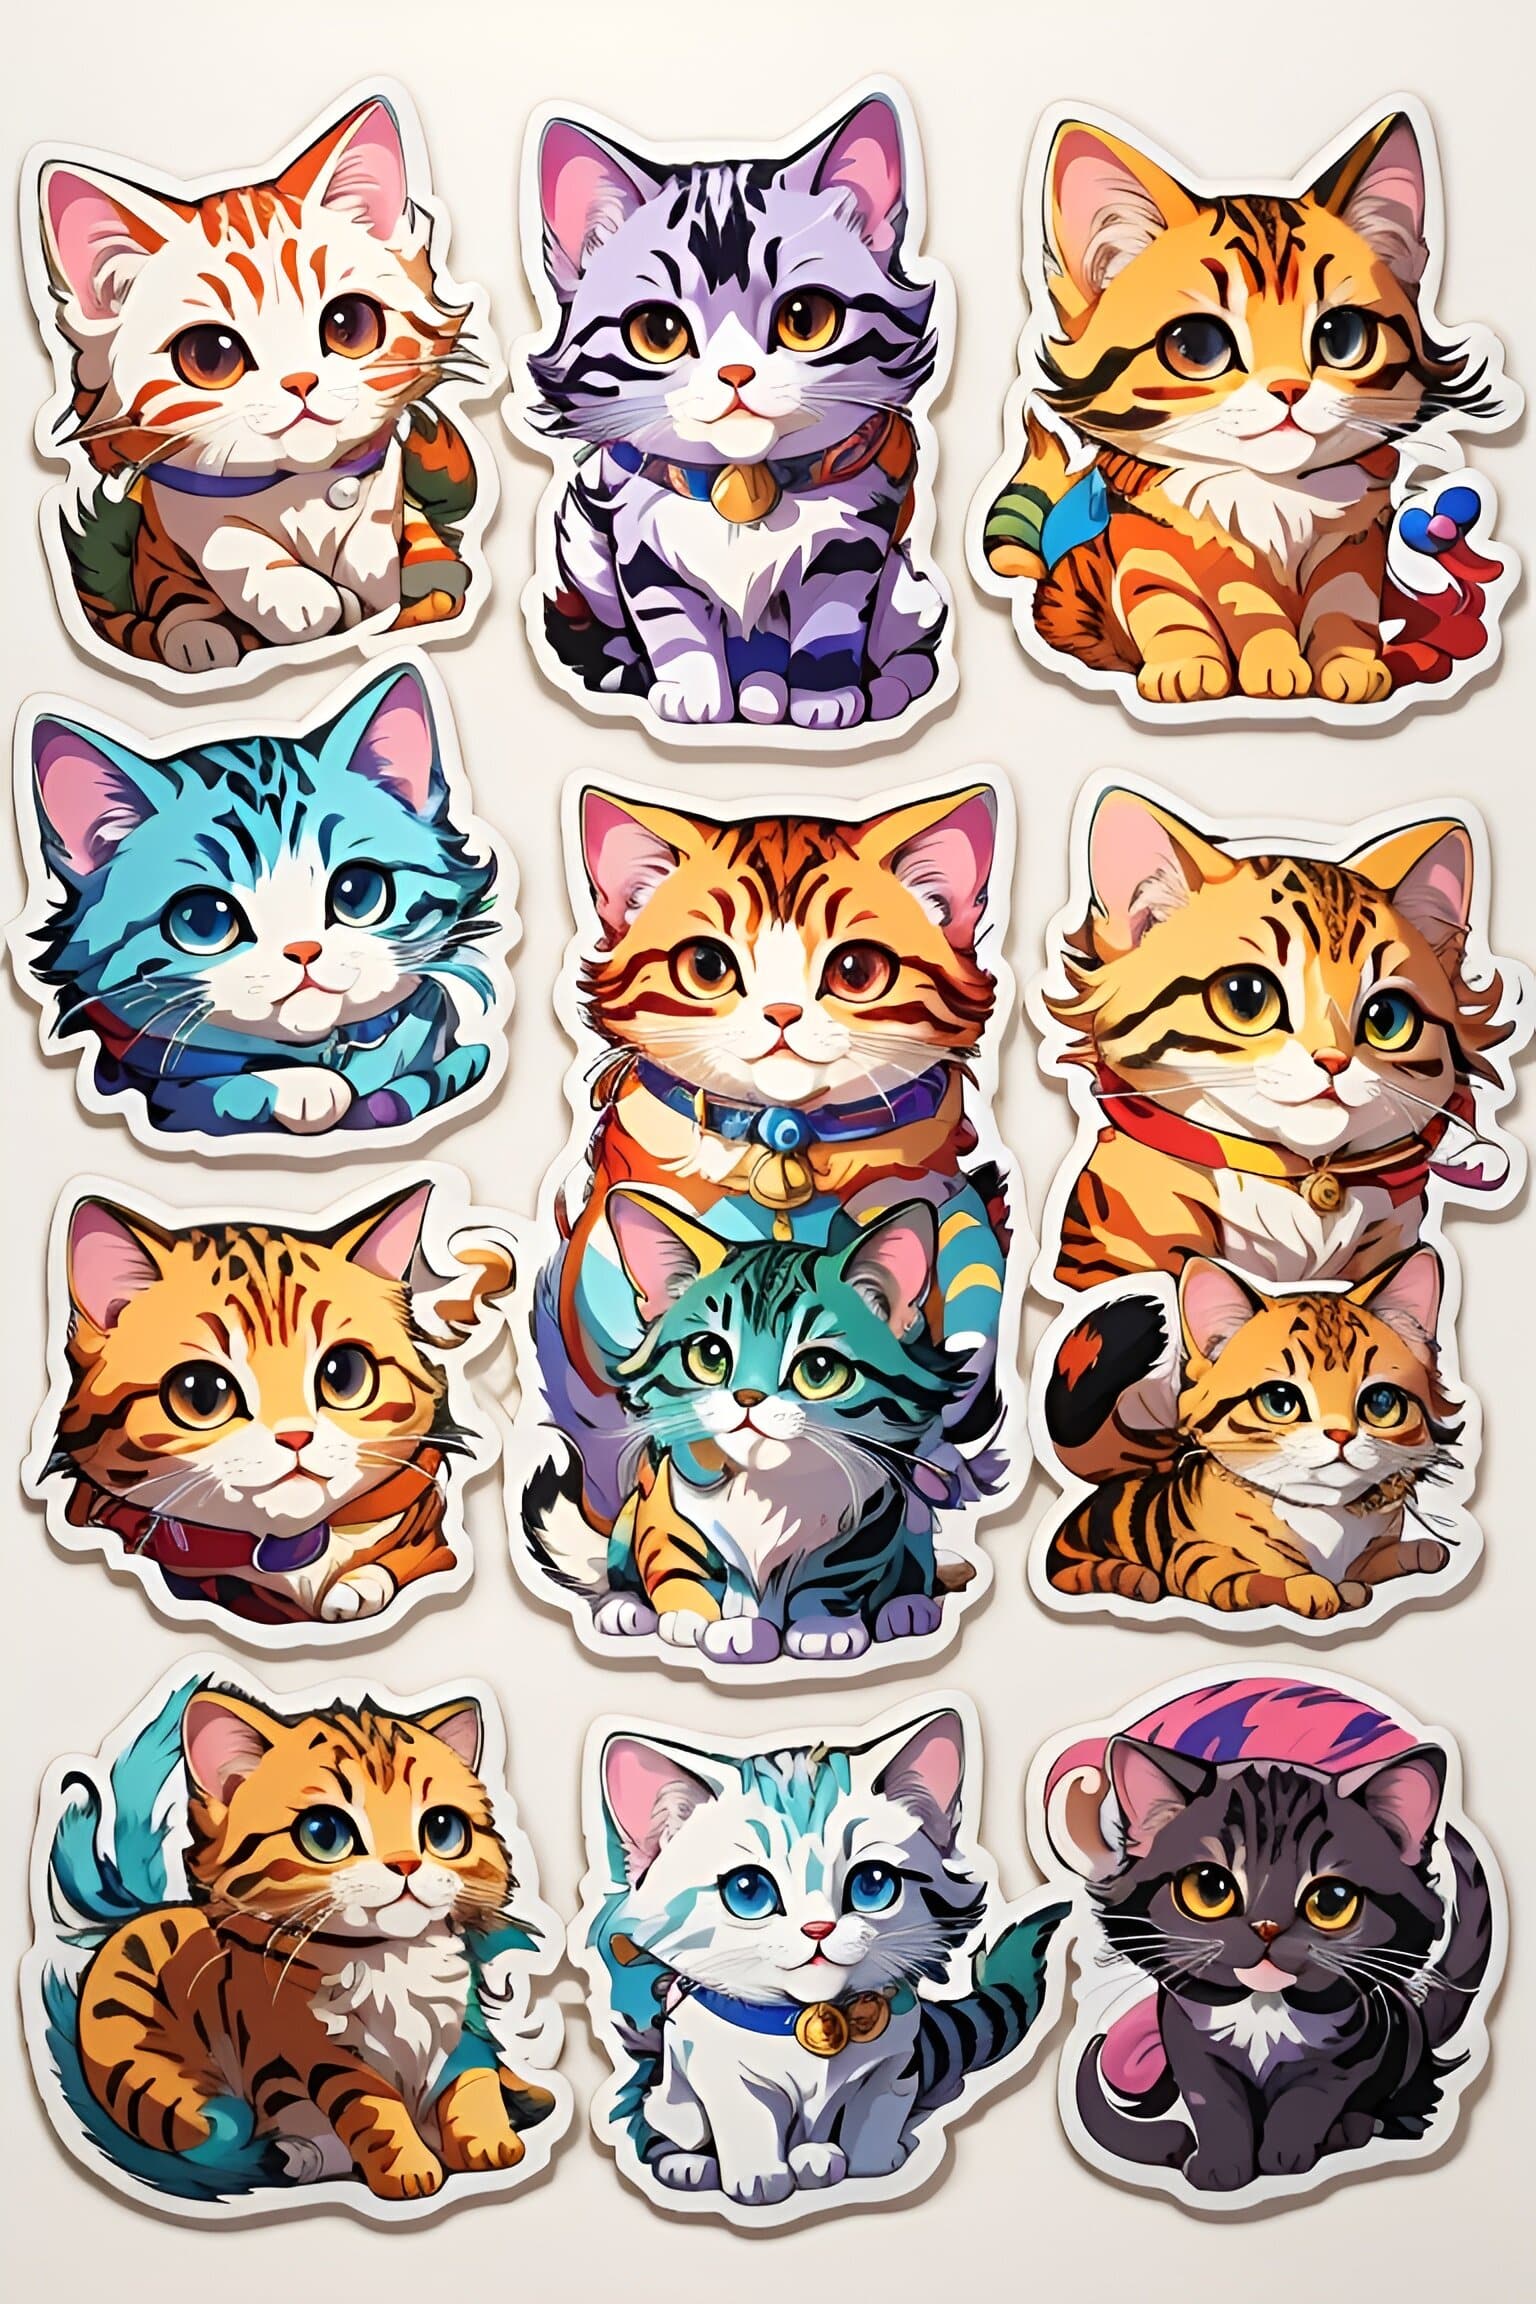 default 6 different stickers with cute cats and colorful colo 0 1c633194 b979 4ef1 ad01 77137e0bd72d 1 1 457